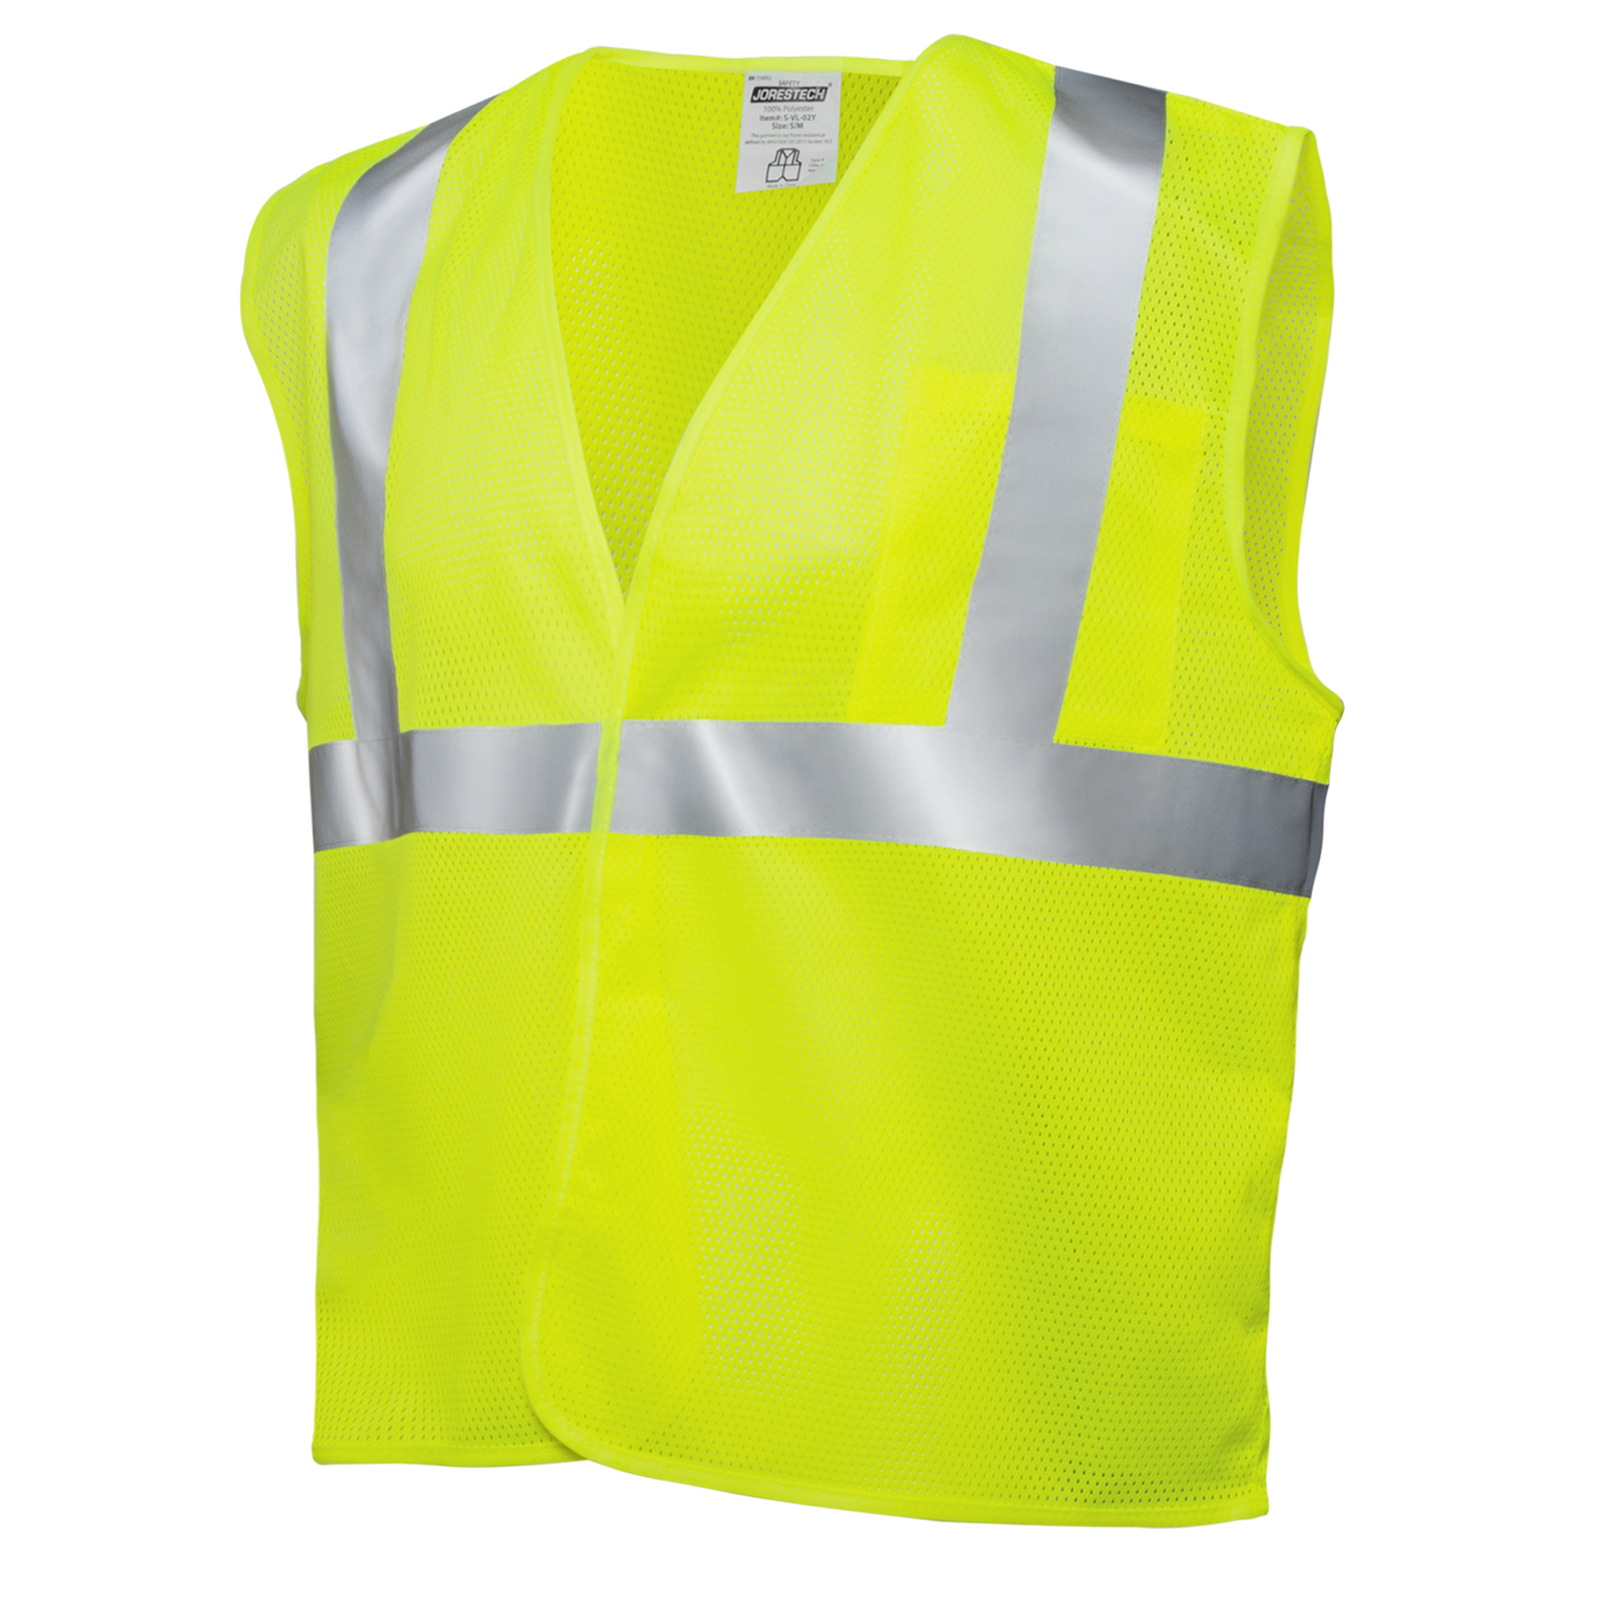 Lime/Yellow hi visibility safety vest with 2 inches reflective strip